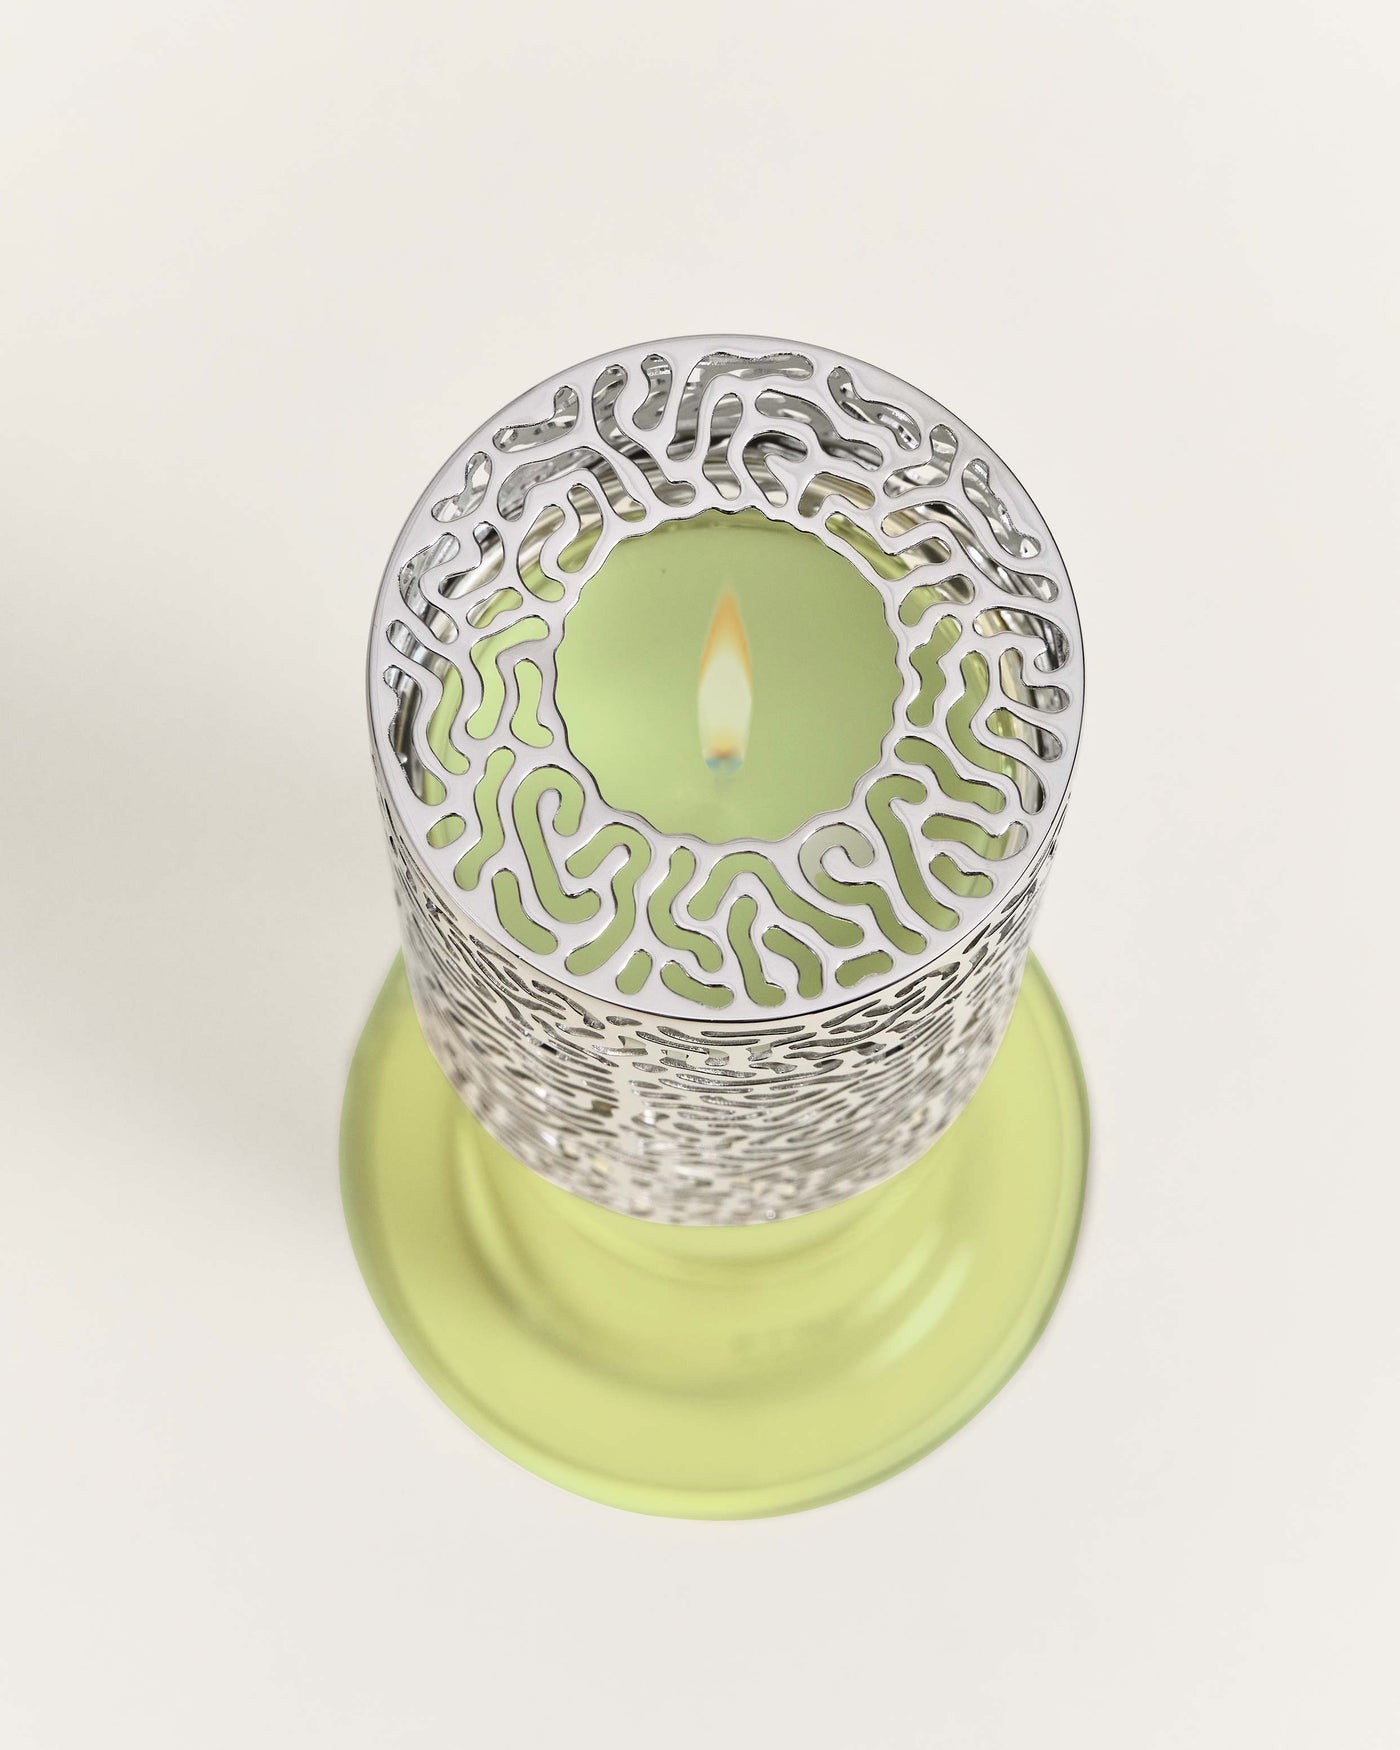 Peau d’Ailleurs Tealight Candle Holder by Starck